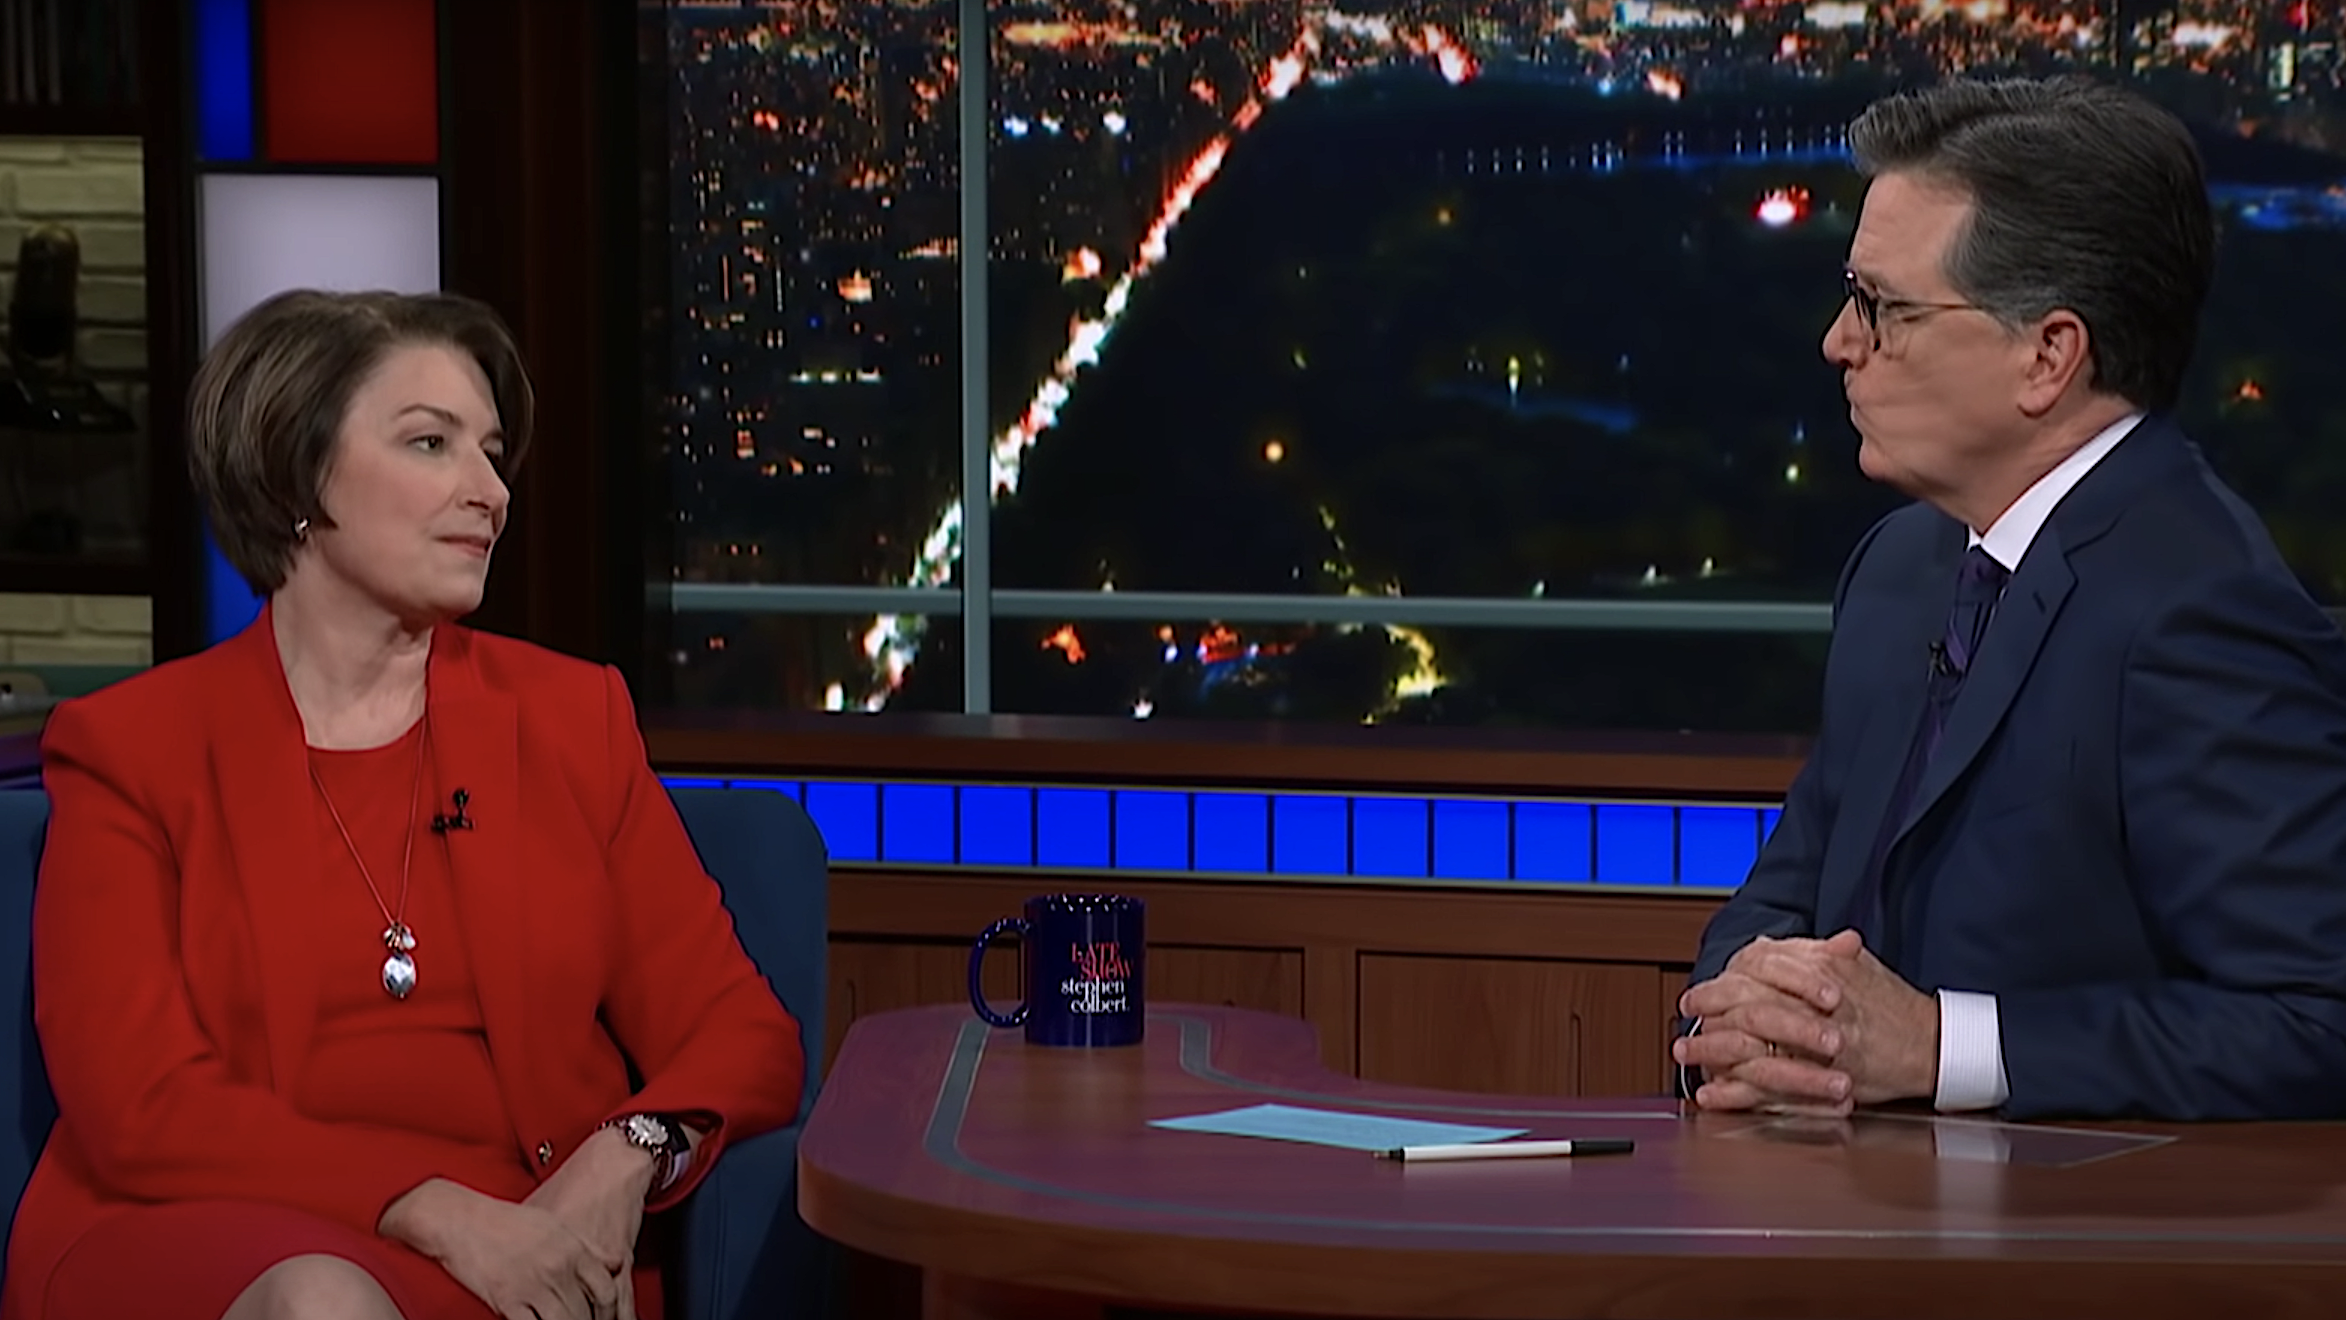 Sen. Amy Klobuchar and Stephen Colbert mark GOP coup day with stories of violence and resolve